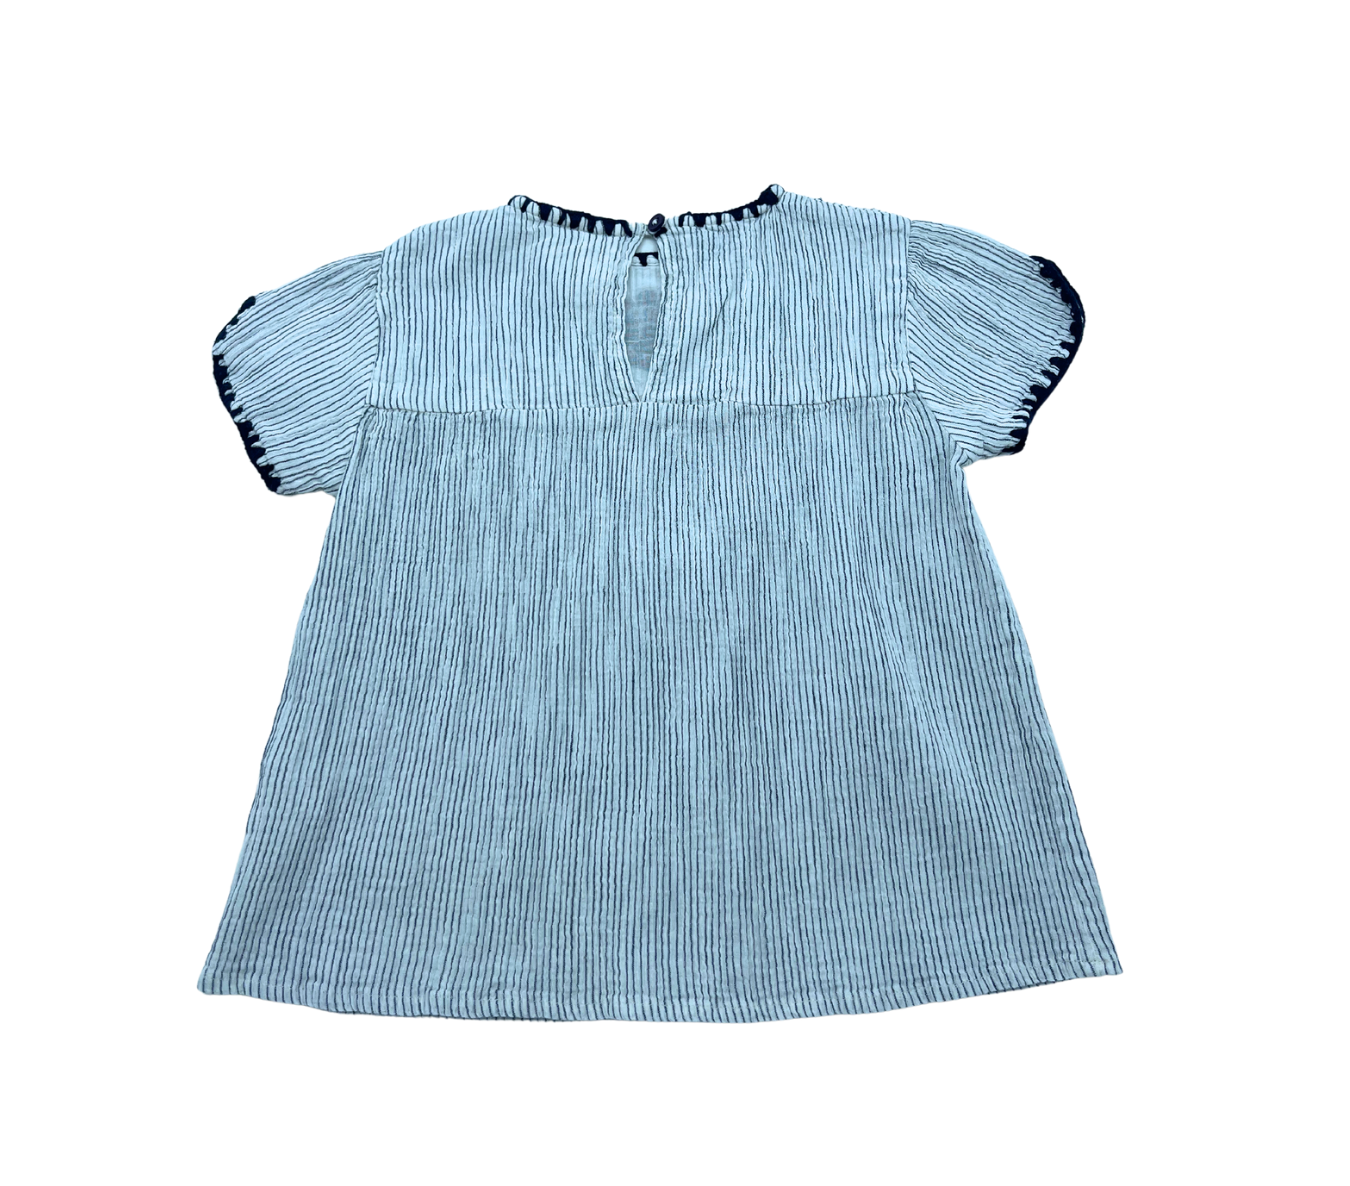 LOUIS LOUISE - Striped blouse - 4 years old